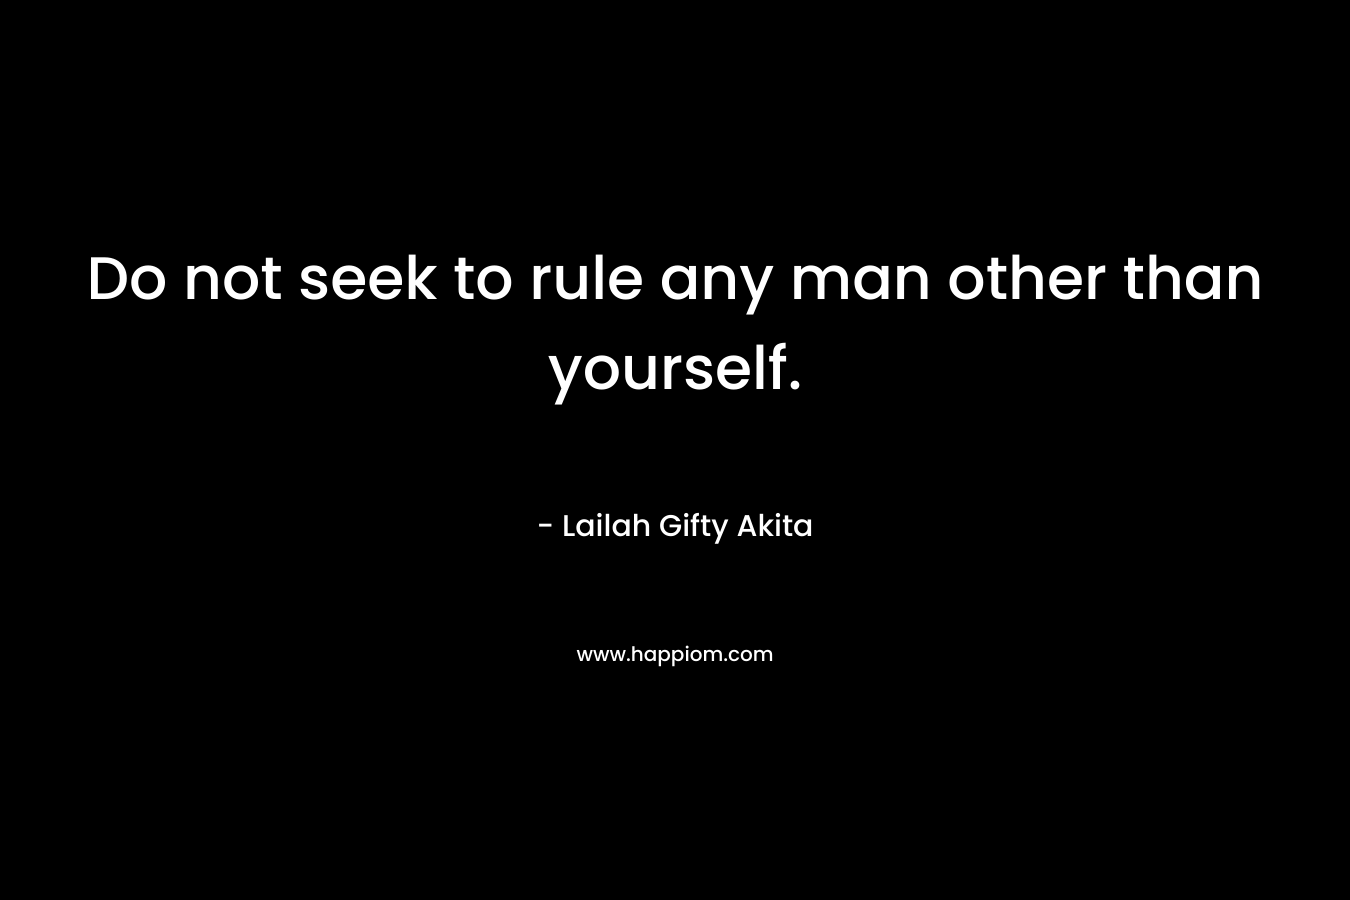 Do not seek to rule any man other than yourself.